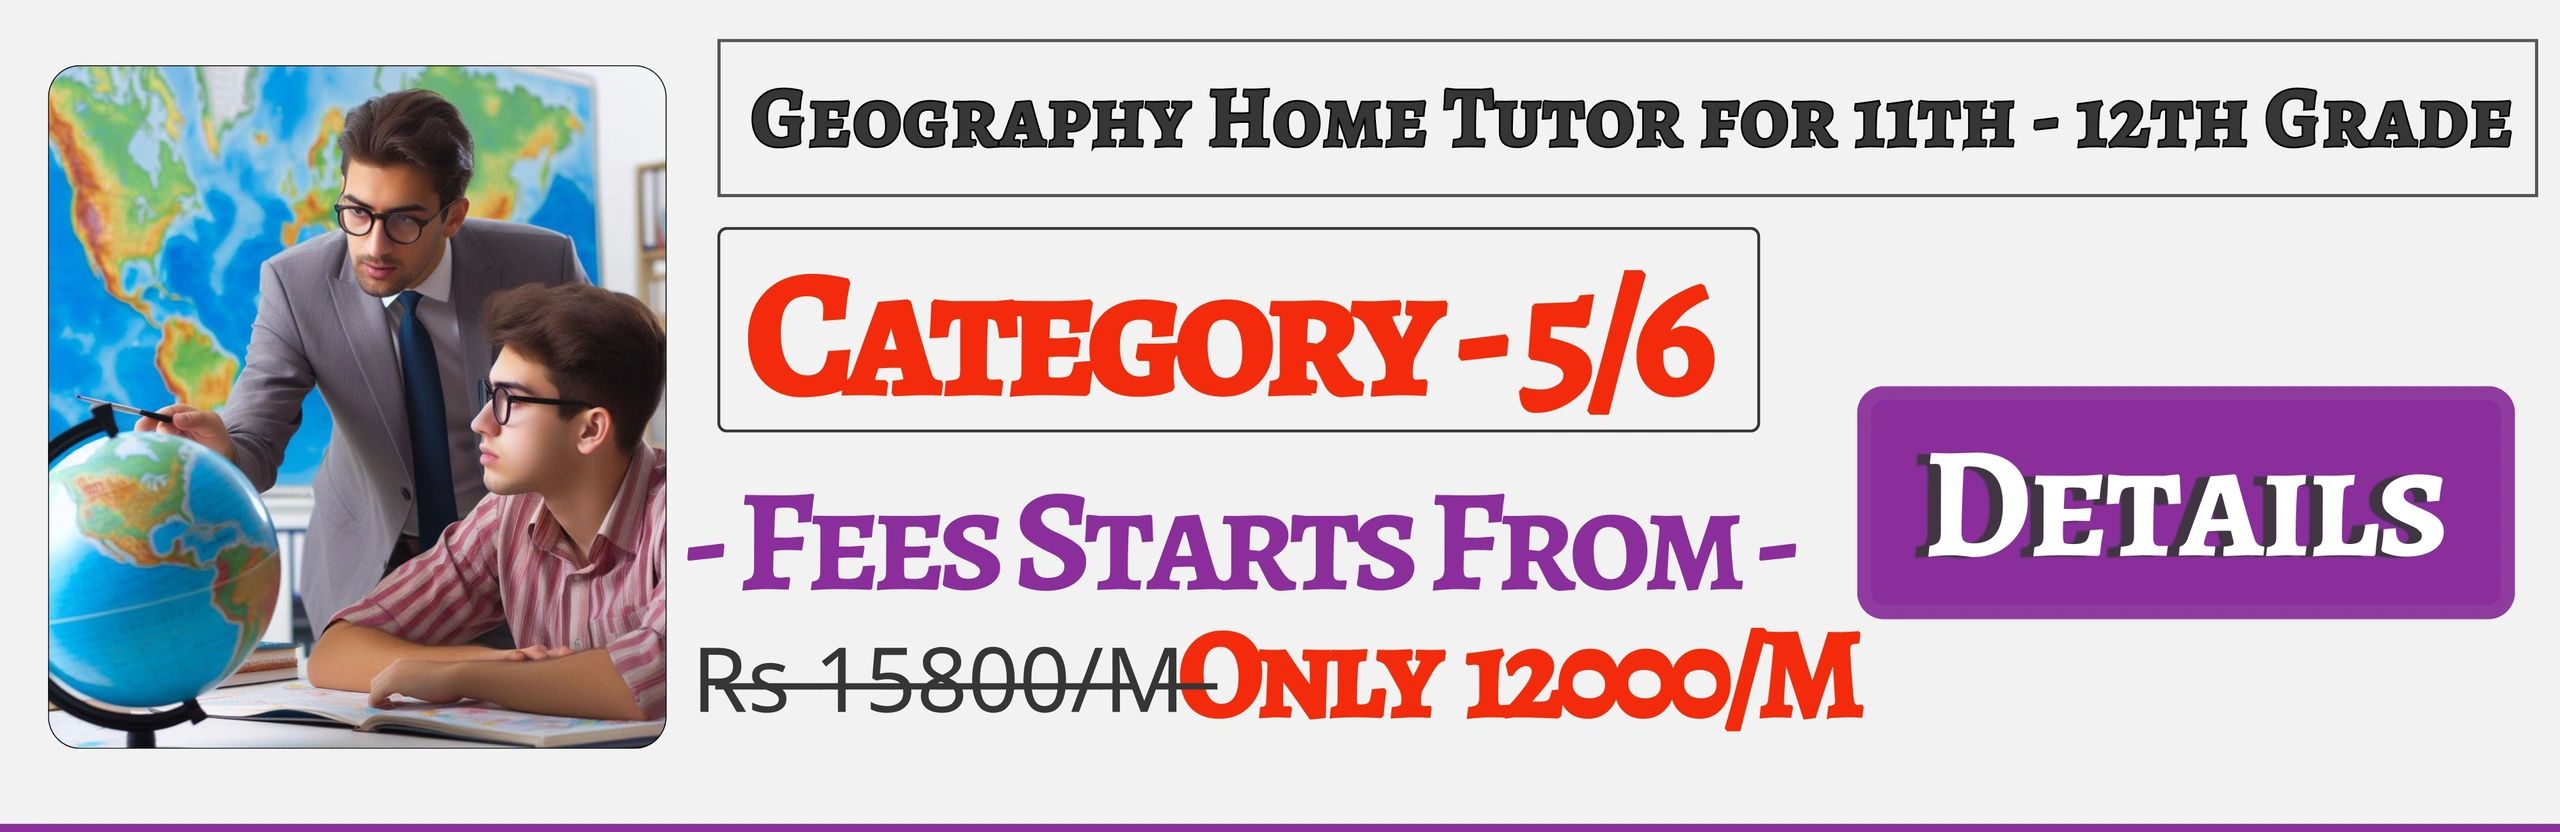 Book Best Nearby Geography Home Tuition Tutors For 11th & 12th In Jaipur , Fees Only 12000/M